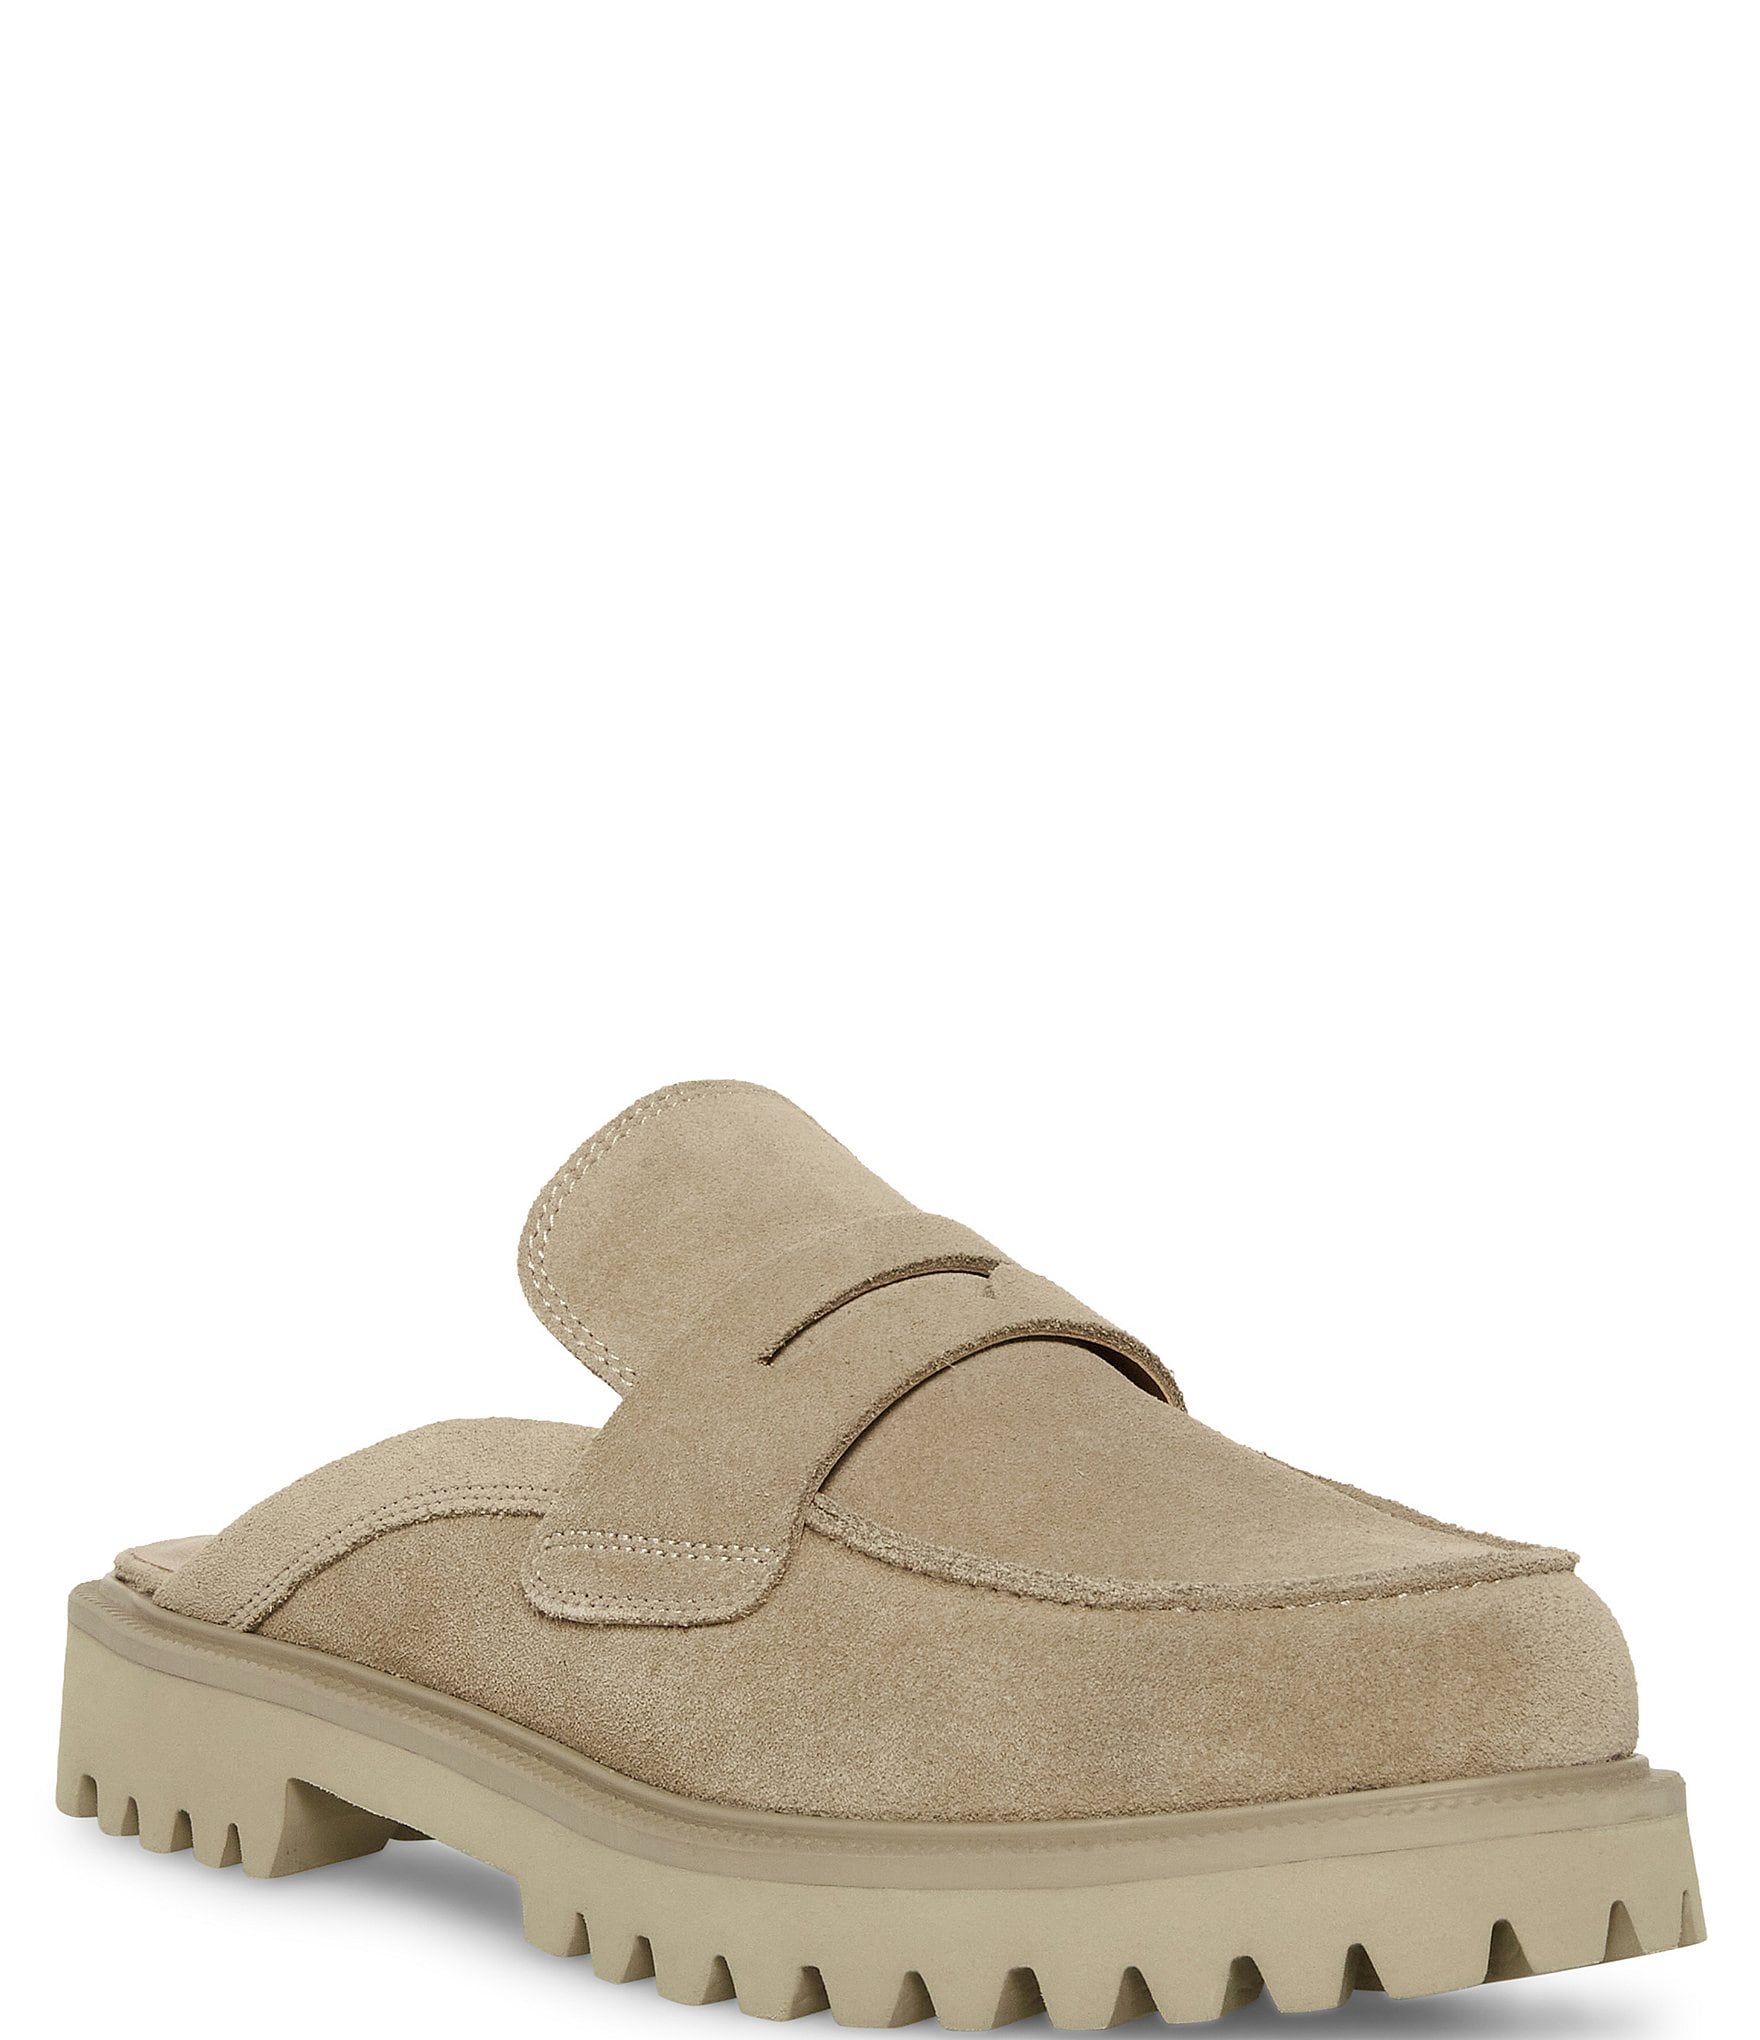 Vince Camuto Cretinian Suede Career Flat Loafers